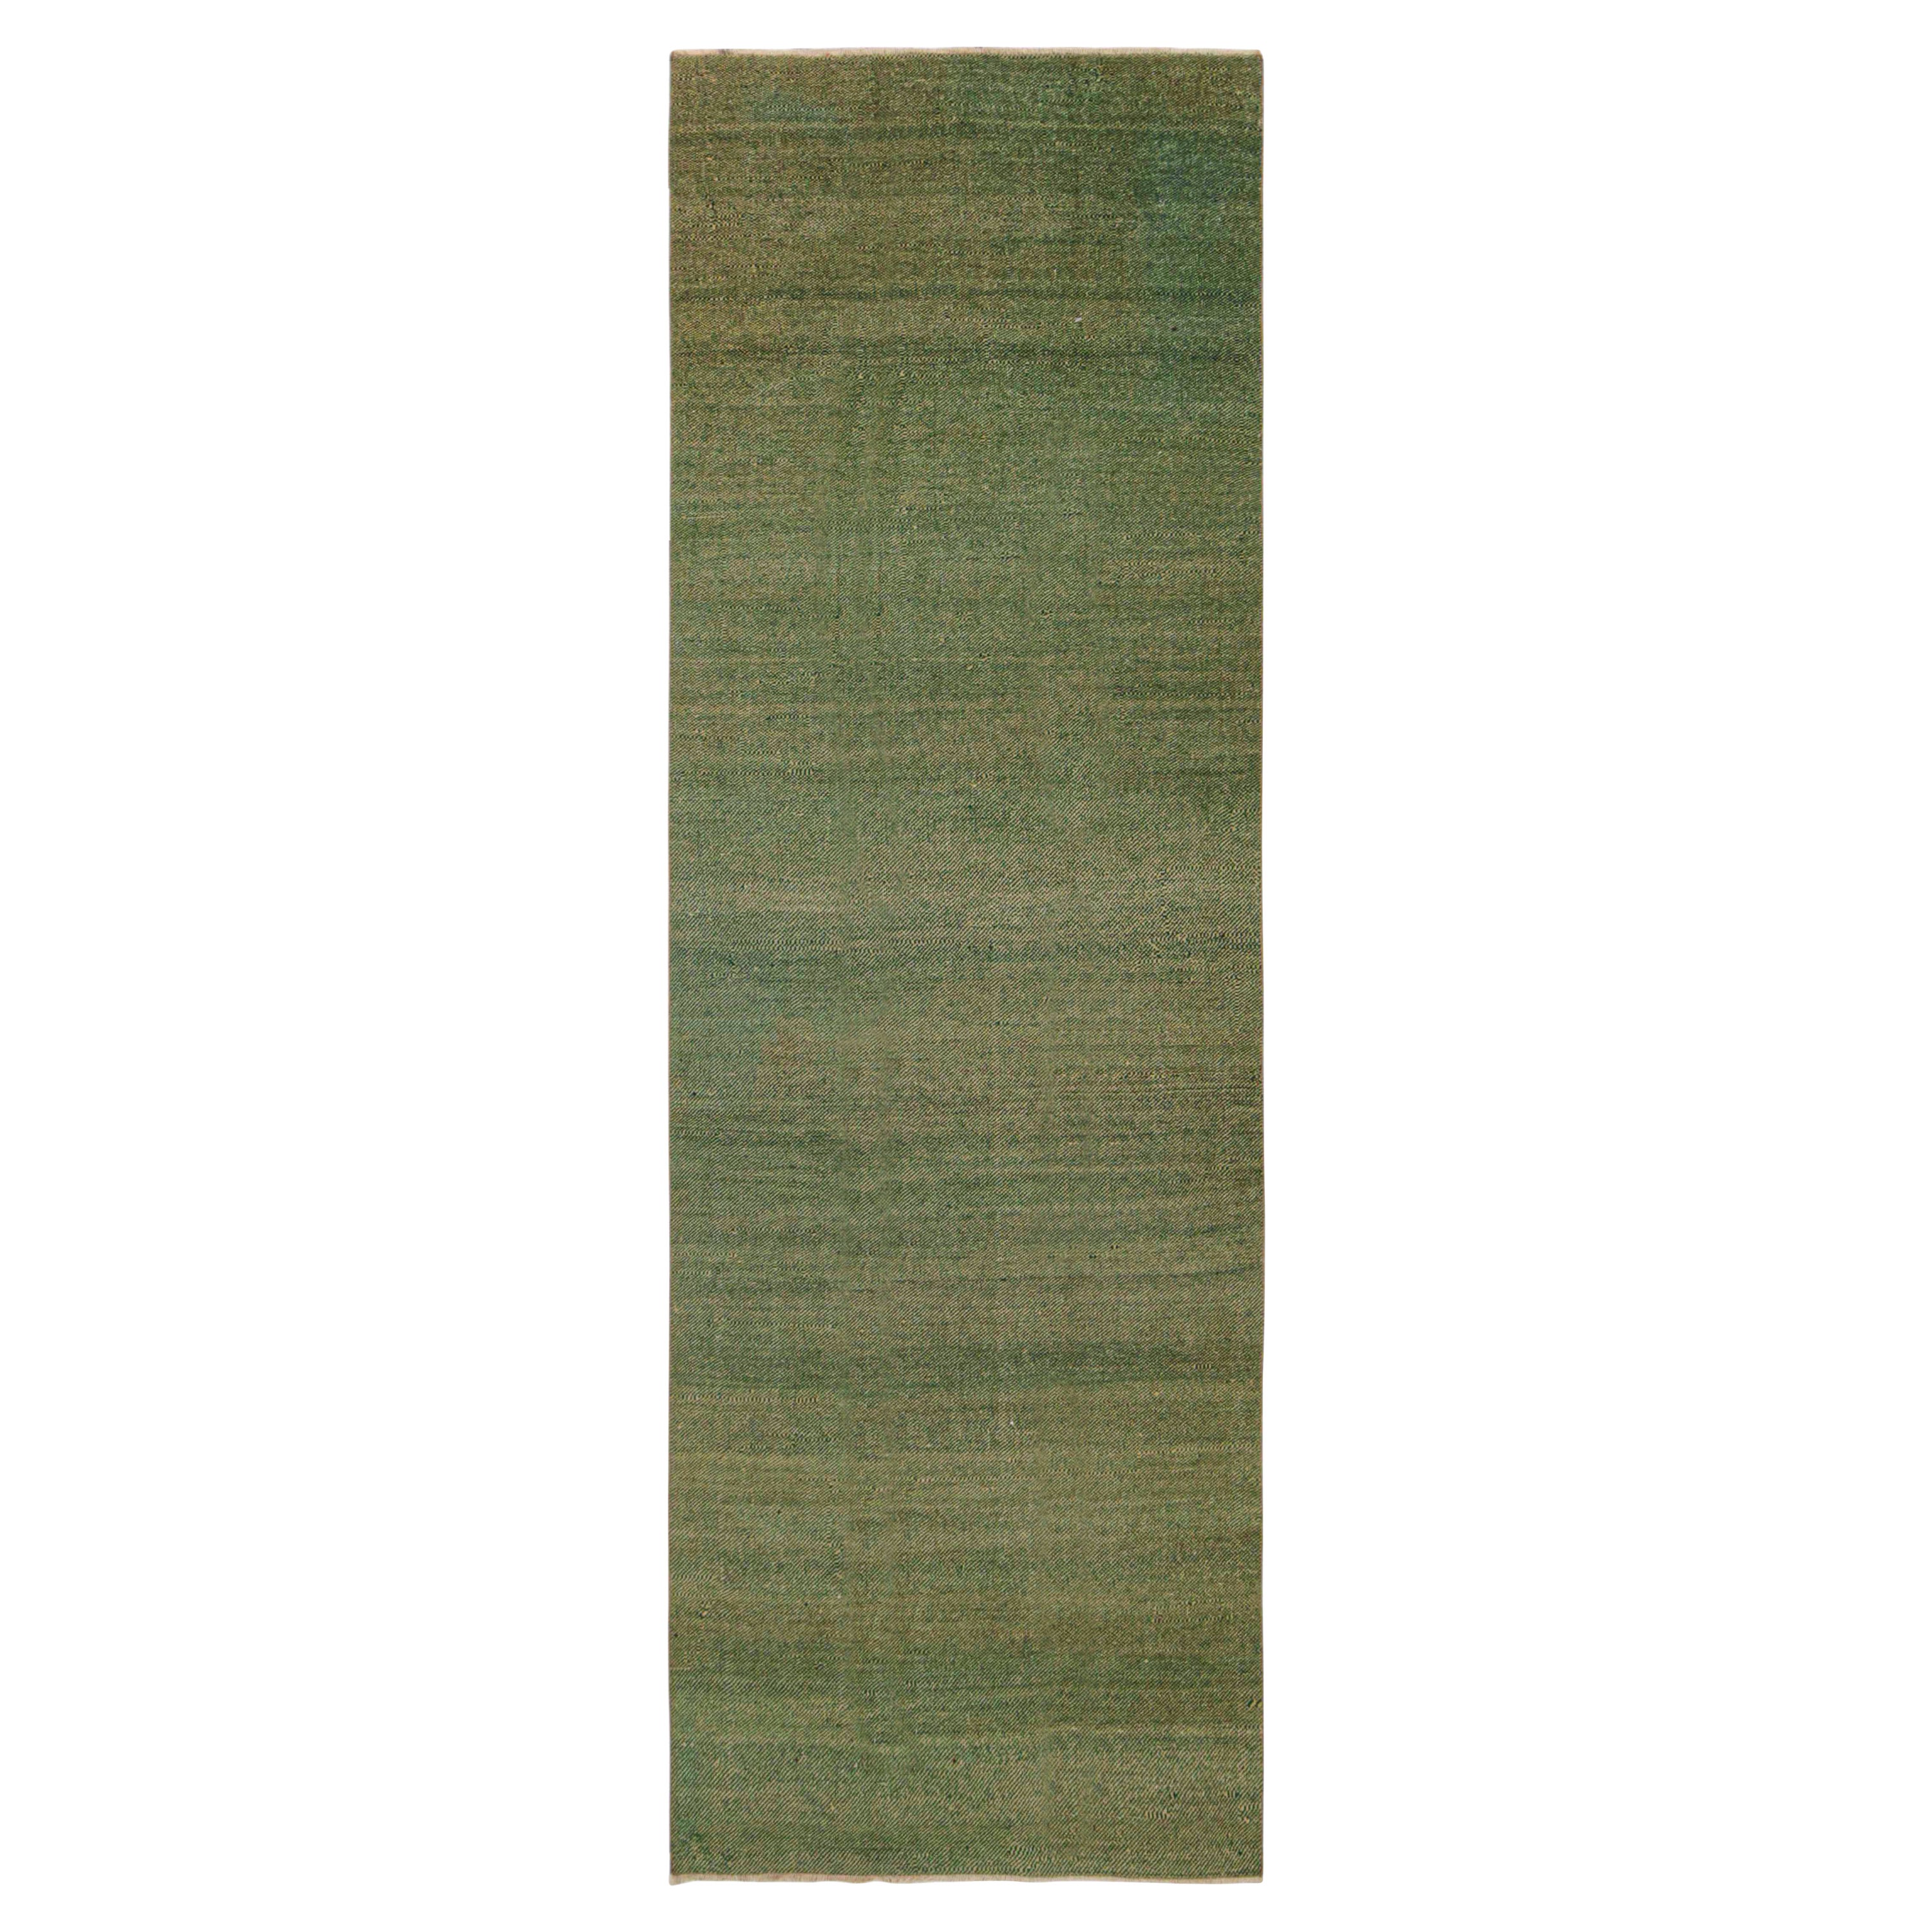 Vintage Midcentury Rug in Solid Green Tone-on-tone Striae by Rug & Kilim For Sale